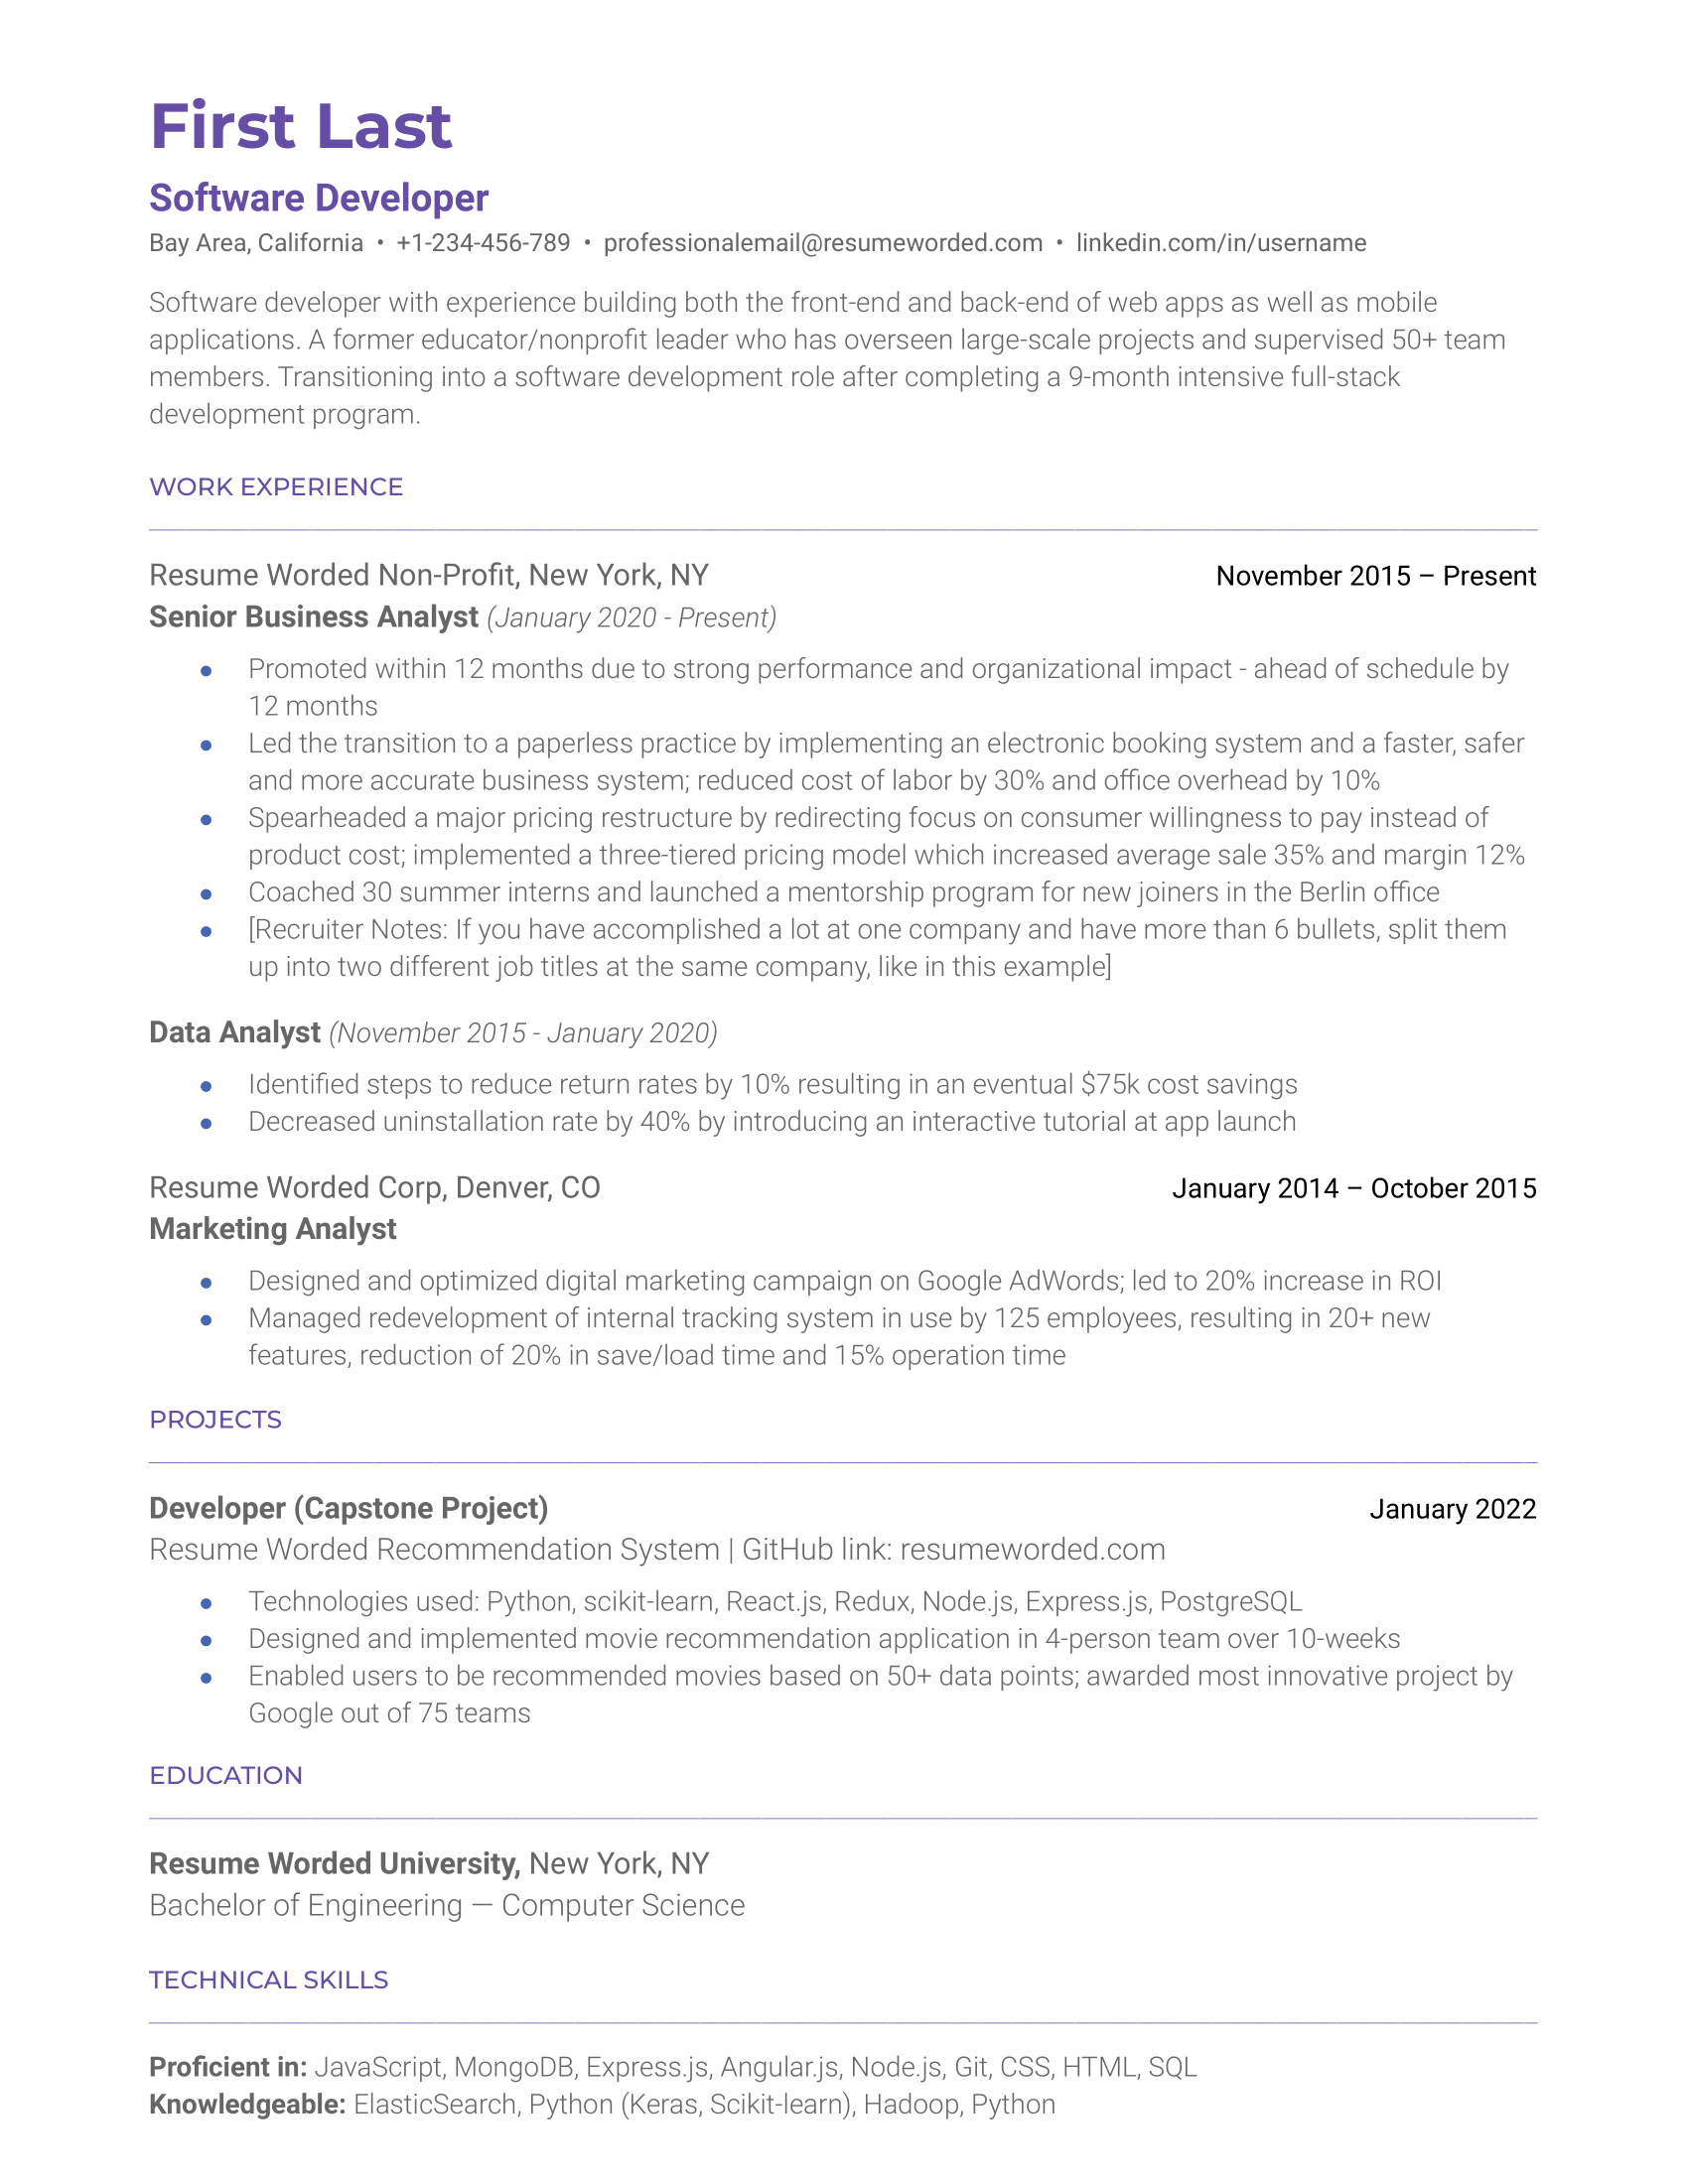 A well-structured CV for a software developer highlighting technical skills and problem-solving experiences.